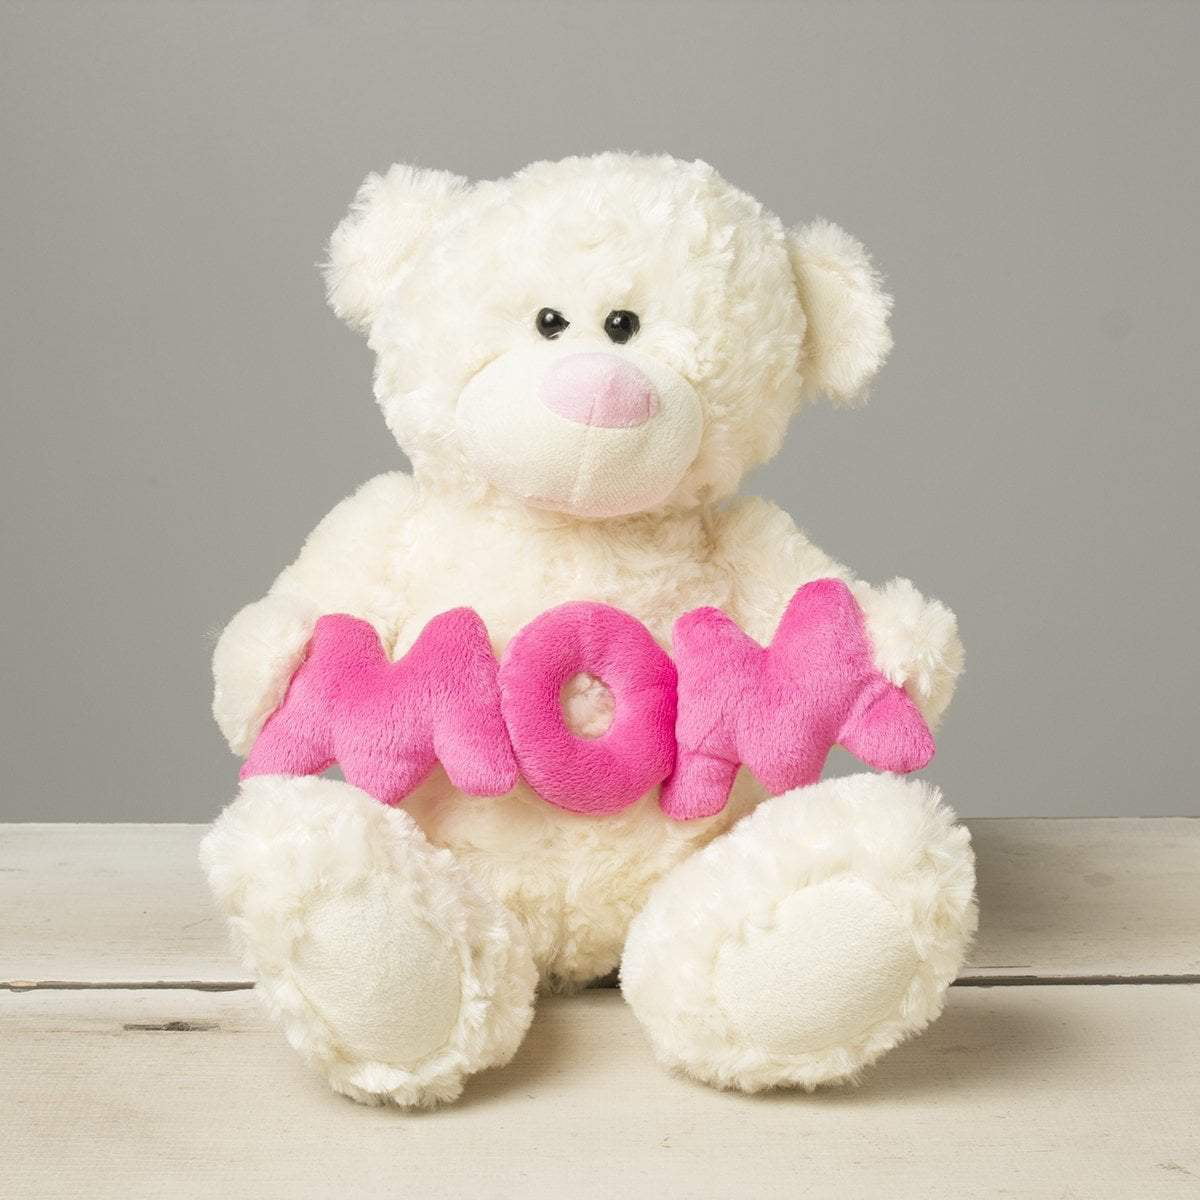 mother's day stuffed animals